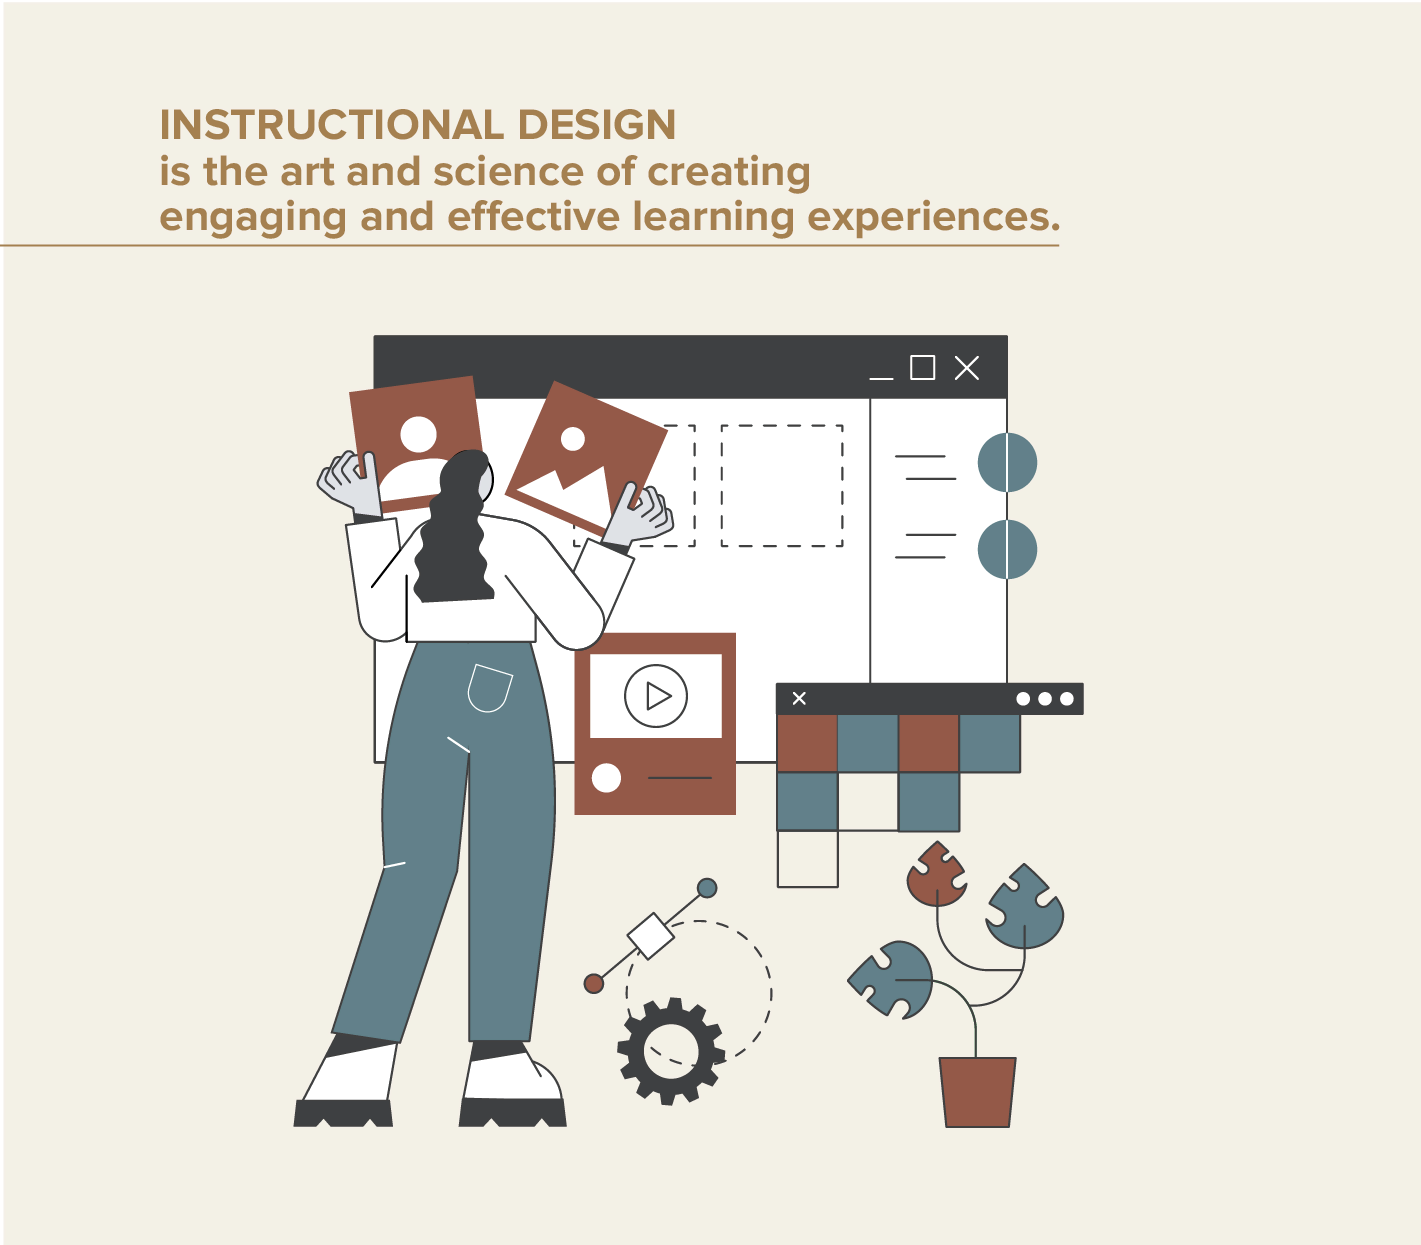 INSTRUCTIONAL DESIGN is the art and science of creating engaging and effective learning experiences